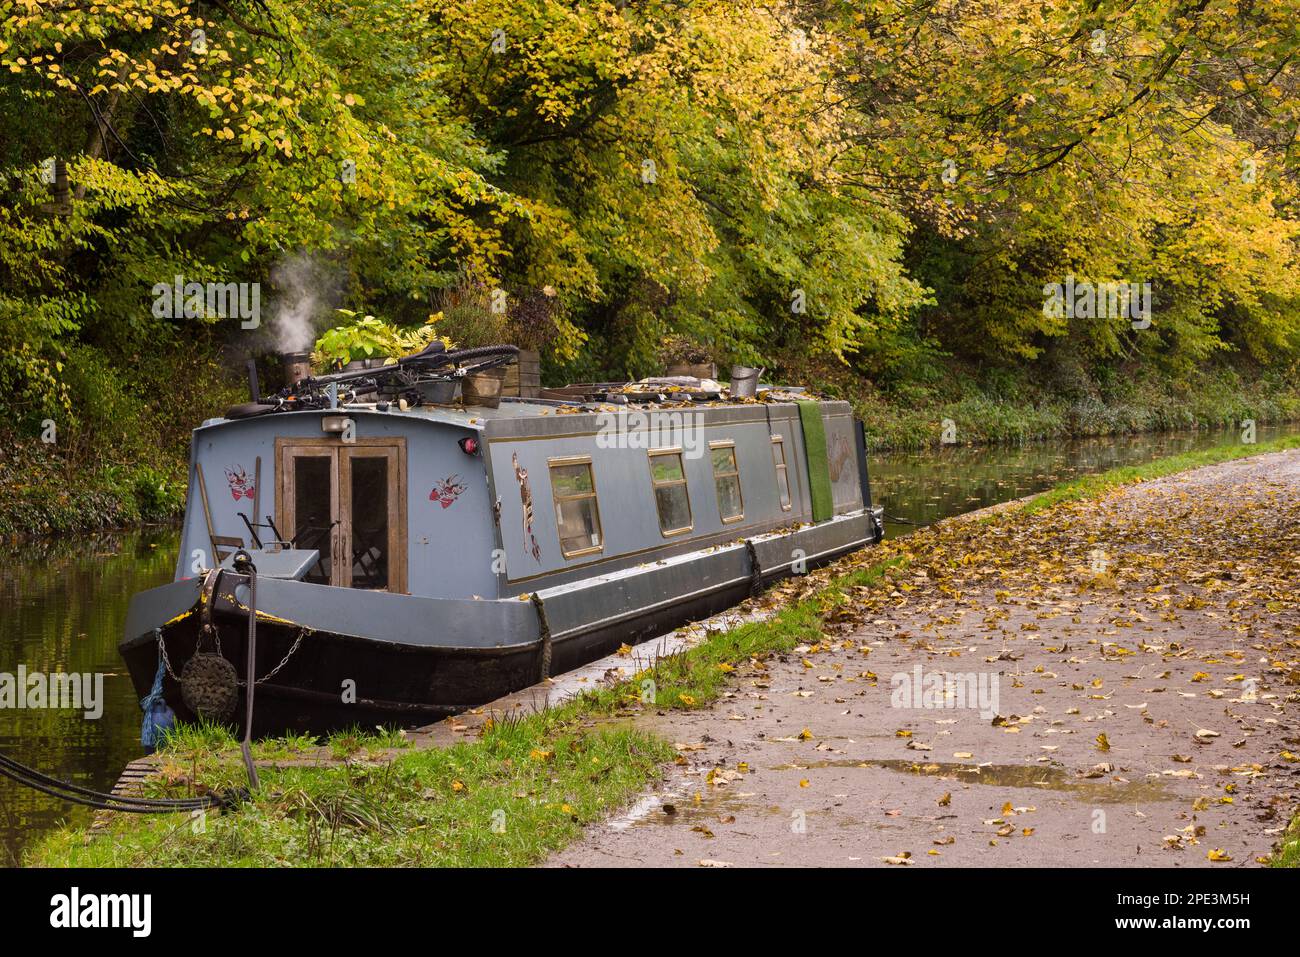 A narrowboat on the Kennet and Avon Canal surrounded by autumn colour, Avoncliff, Wiltshire, England. Stock Photo